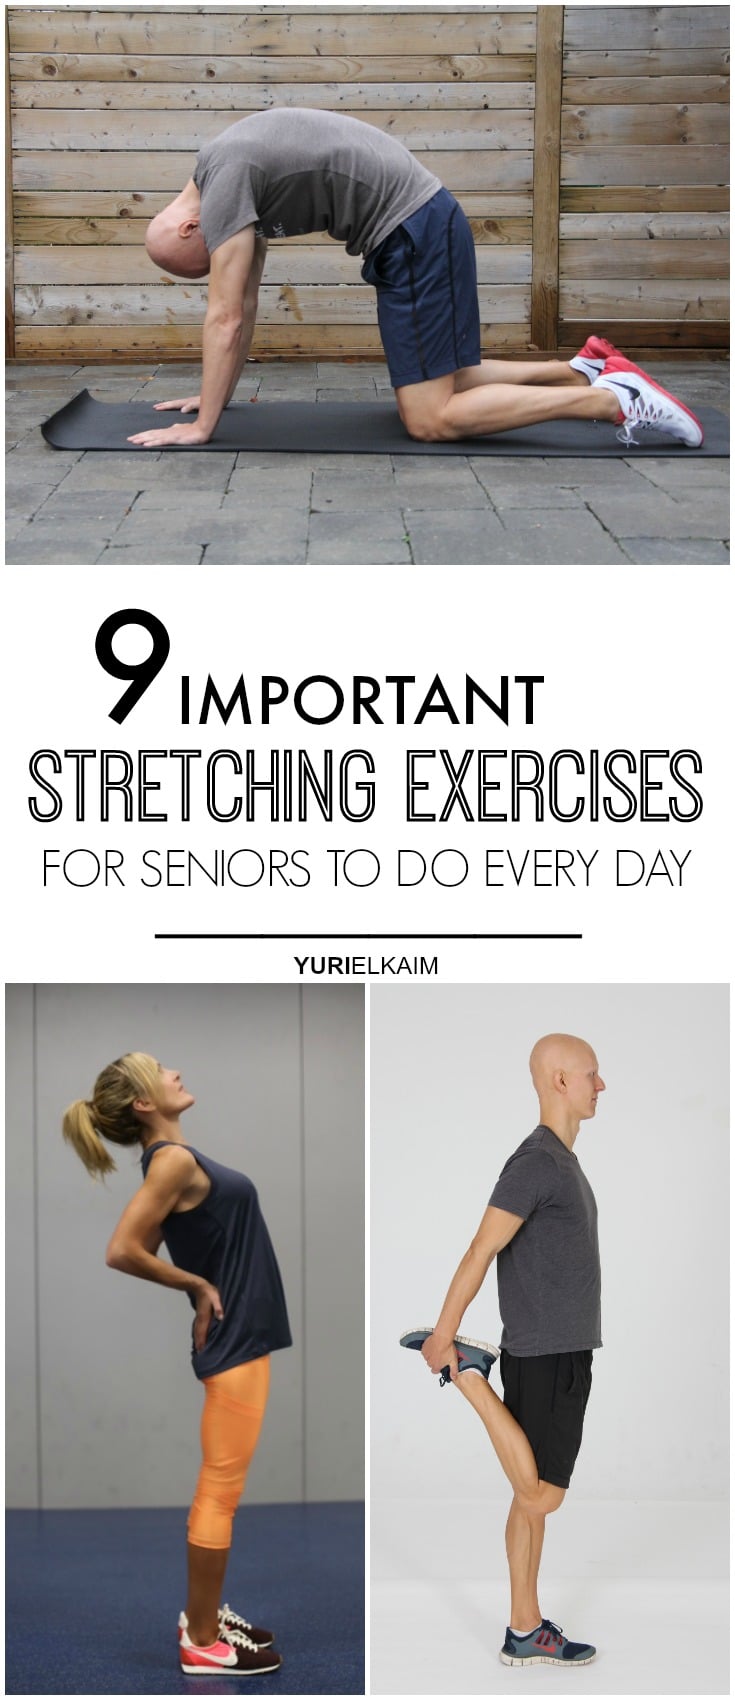 9 Important Stretching Exercises for Seniors to Do Every Day - Pinterest